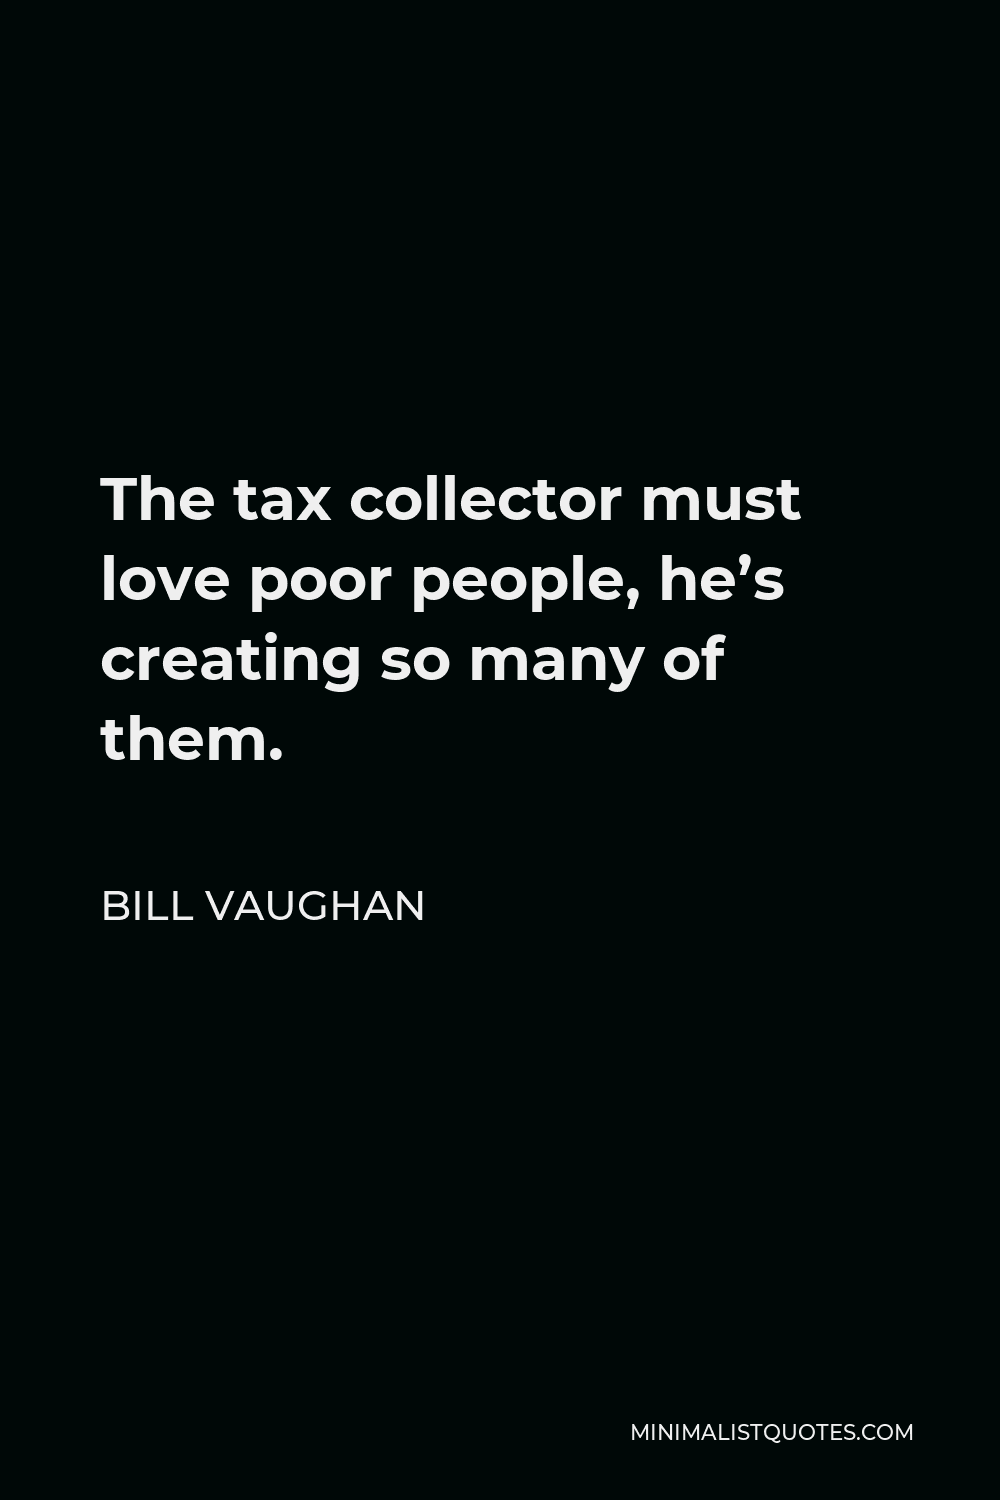 Bill Vaughan Quote - The tax collector must love poor people, he’s creating so many of them.